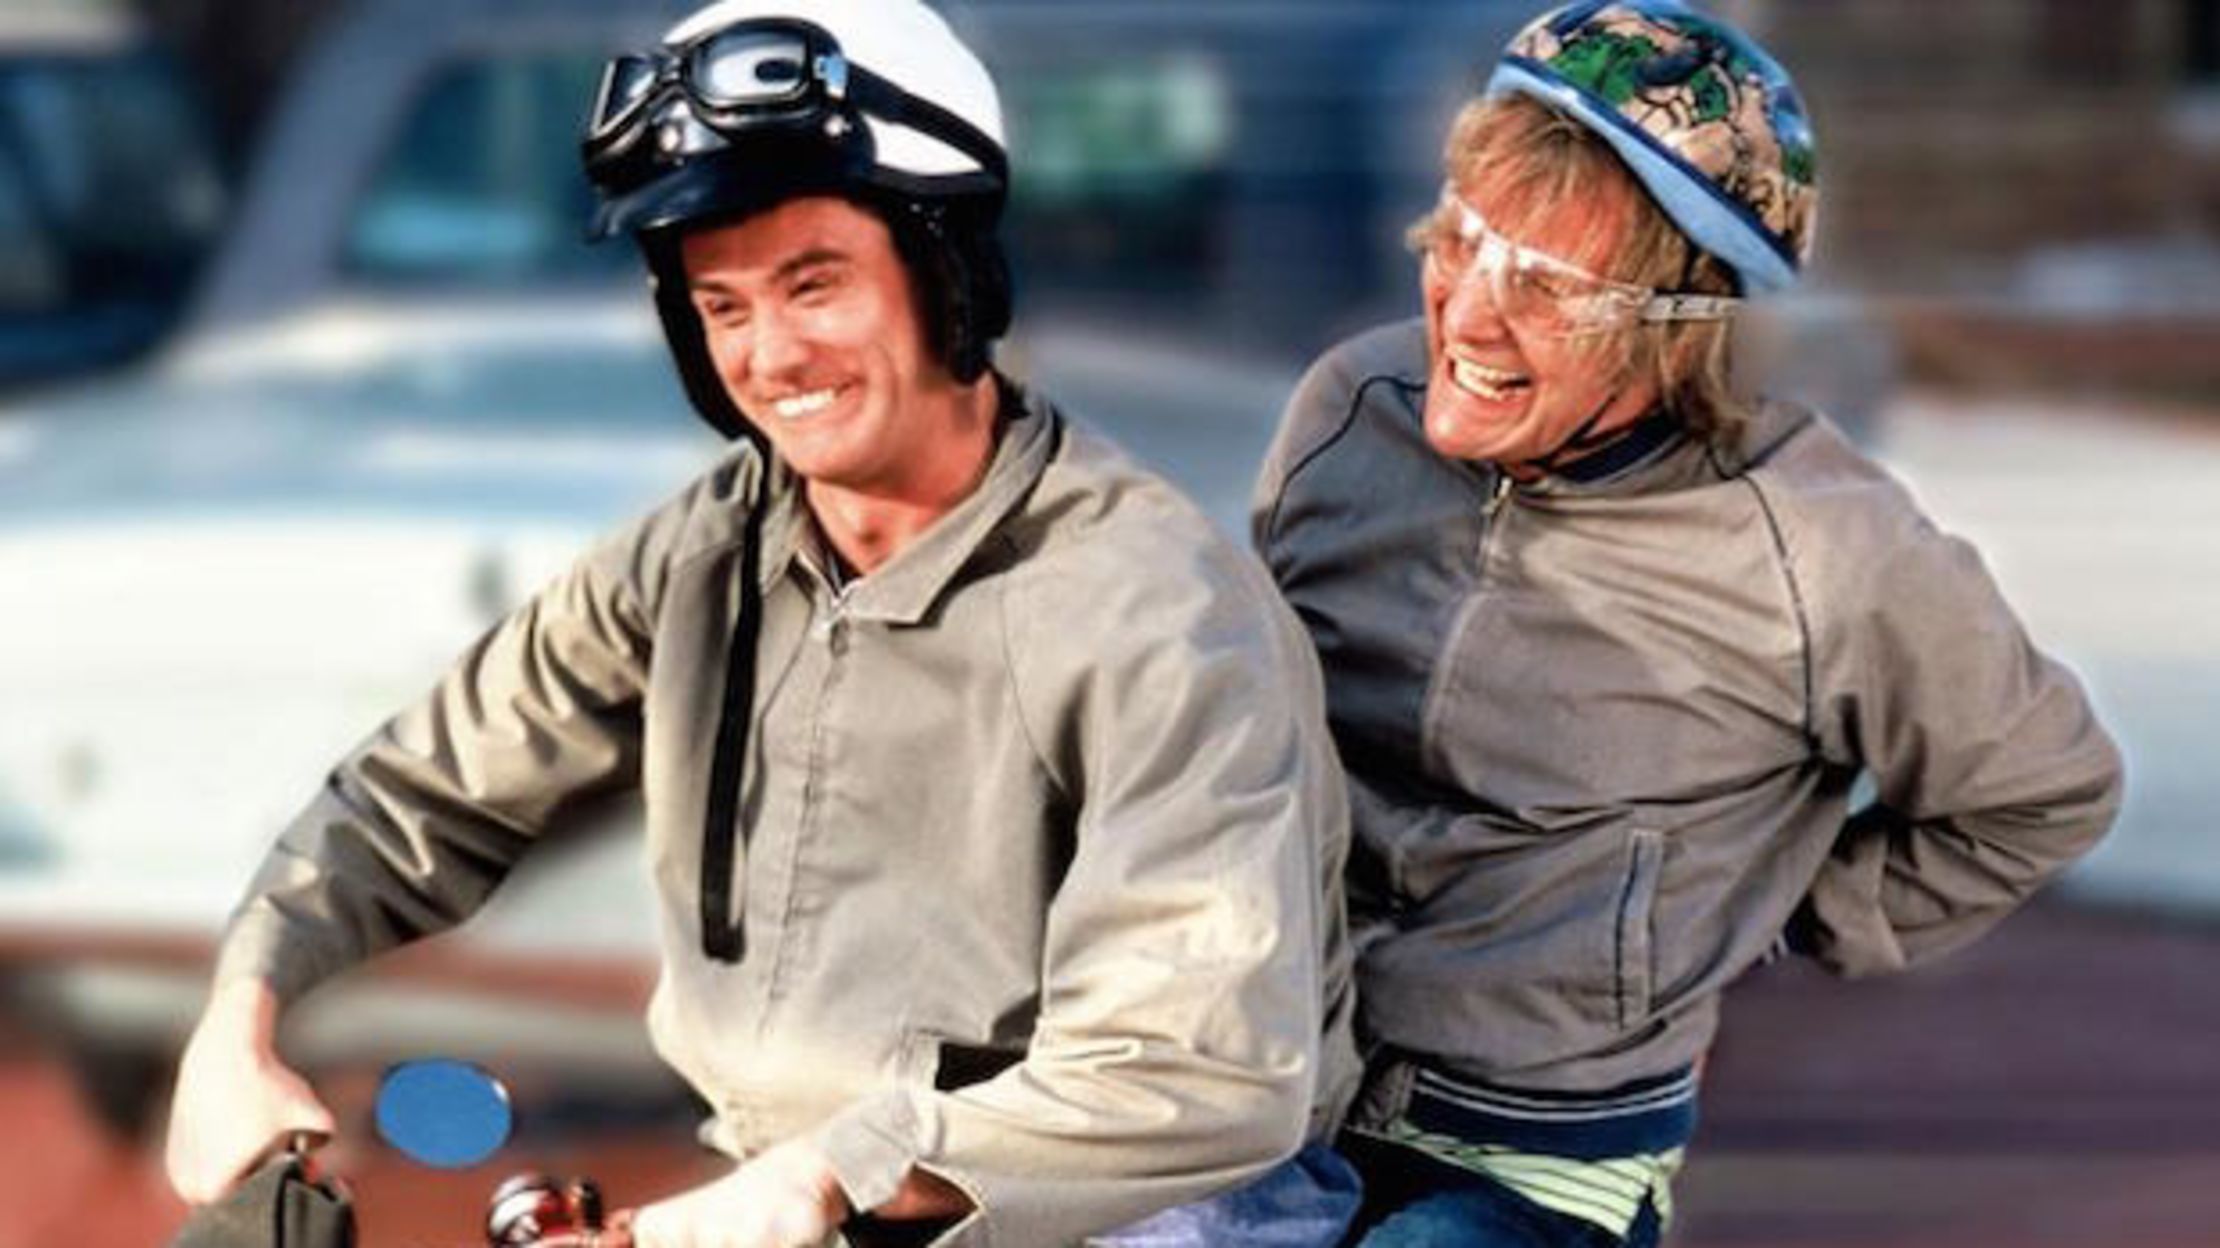 15 Brilliant Facts About Dumb and Dumber | Mental Floss